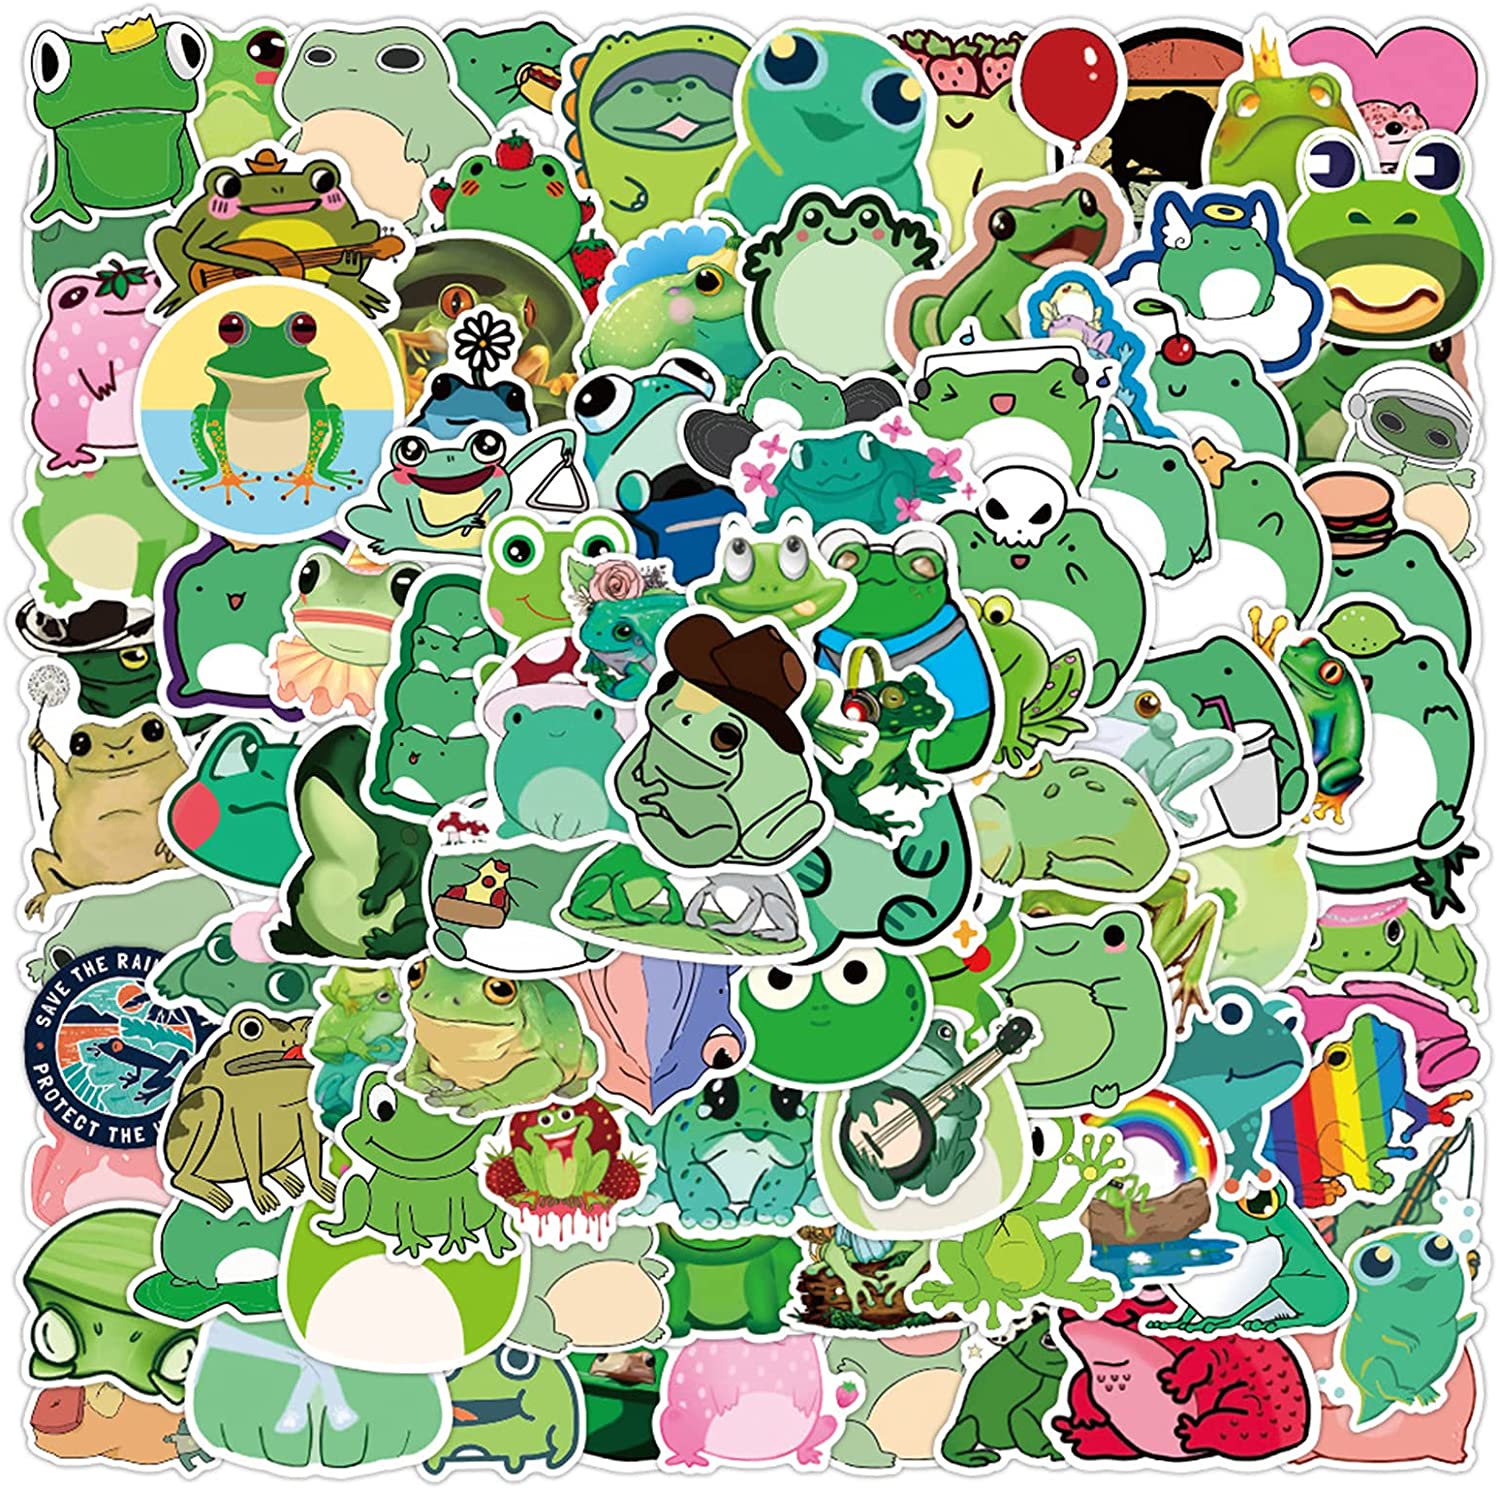 200 Pieces Cute Frog Stickers Vinyl Waterproof Animal Stickers for Laptop Cartoon Stickers Aesthetic Stickers for Laptop Guitar Skateboard Computer Water Bottles Phone 